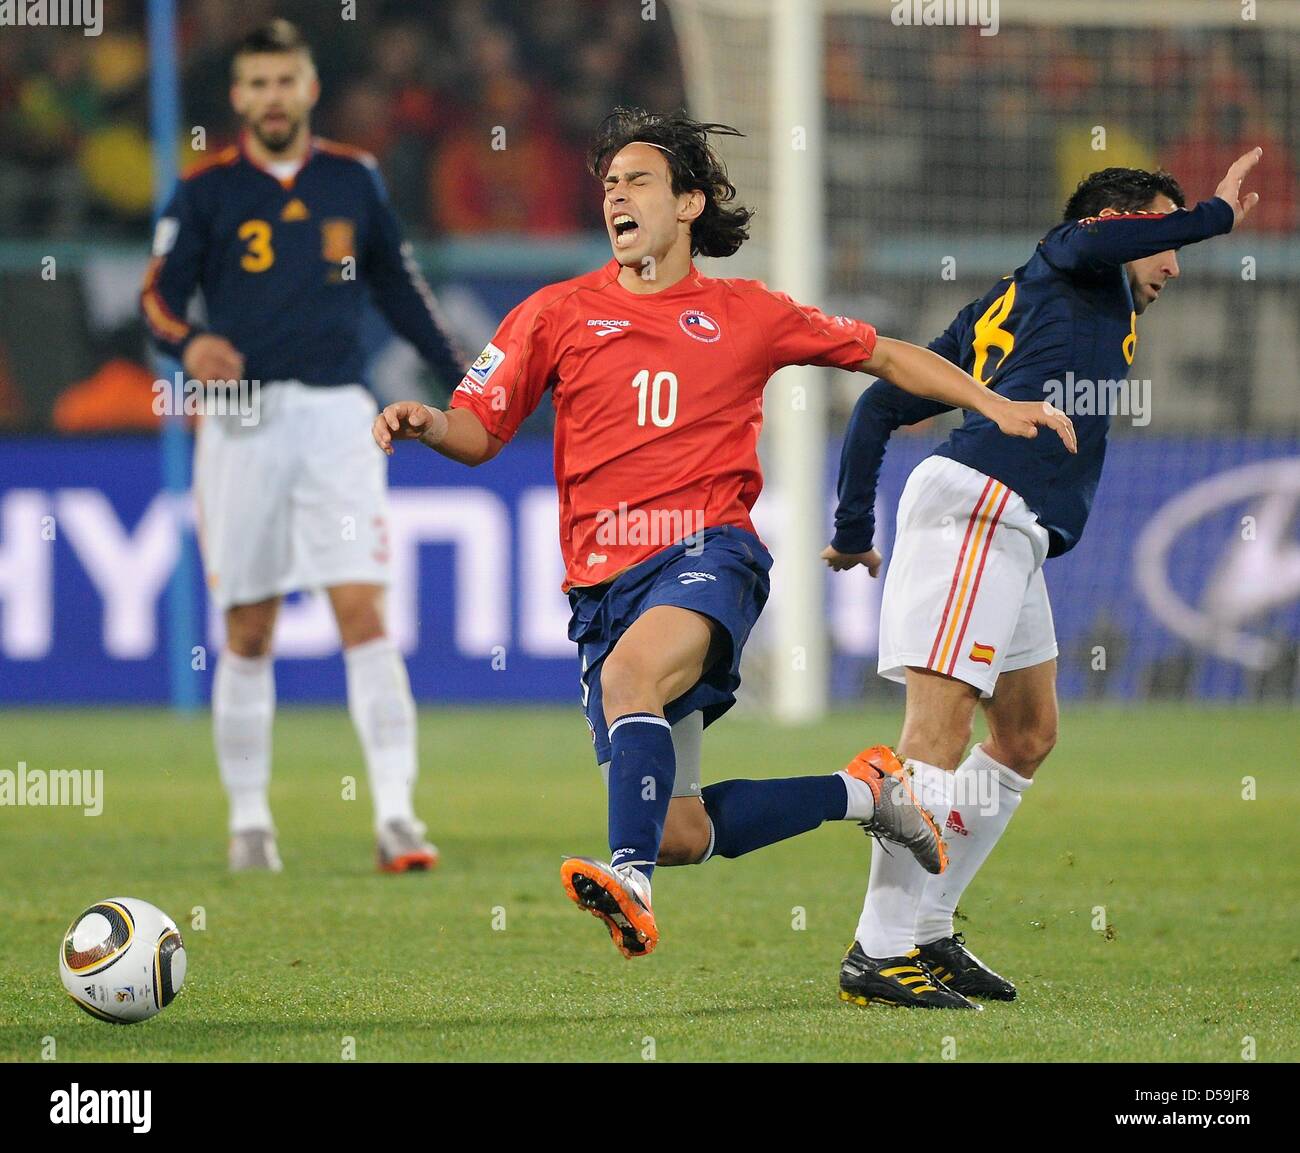 Chile's Jorge Valdivia (L) is tackled by Spain's Xavi Hernandez during the 2010 FIFA World Cup group H match between Chile and Spain at Loftus Versfeld Stadium in Pretoria, South Africa 25 June 2010. Photo: Marcus Brandt dpa - Please refer to http://dpaq.de/FIFA-WM2010-TC Stock Photo